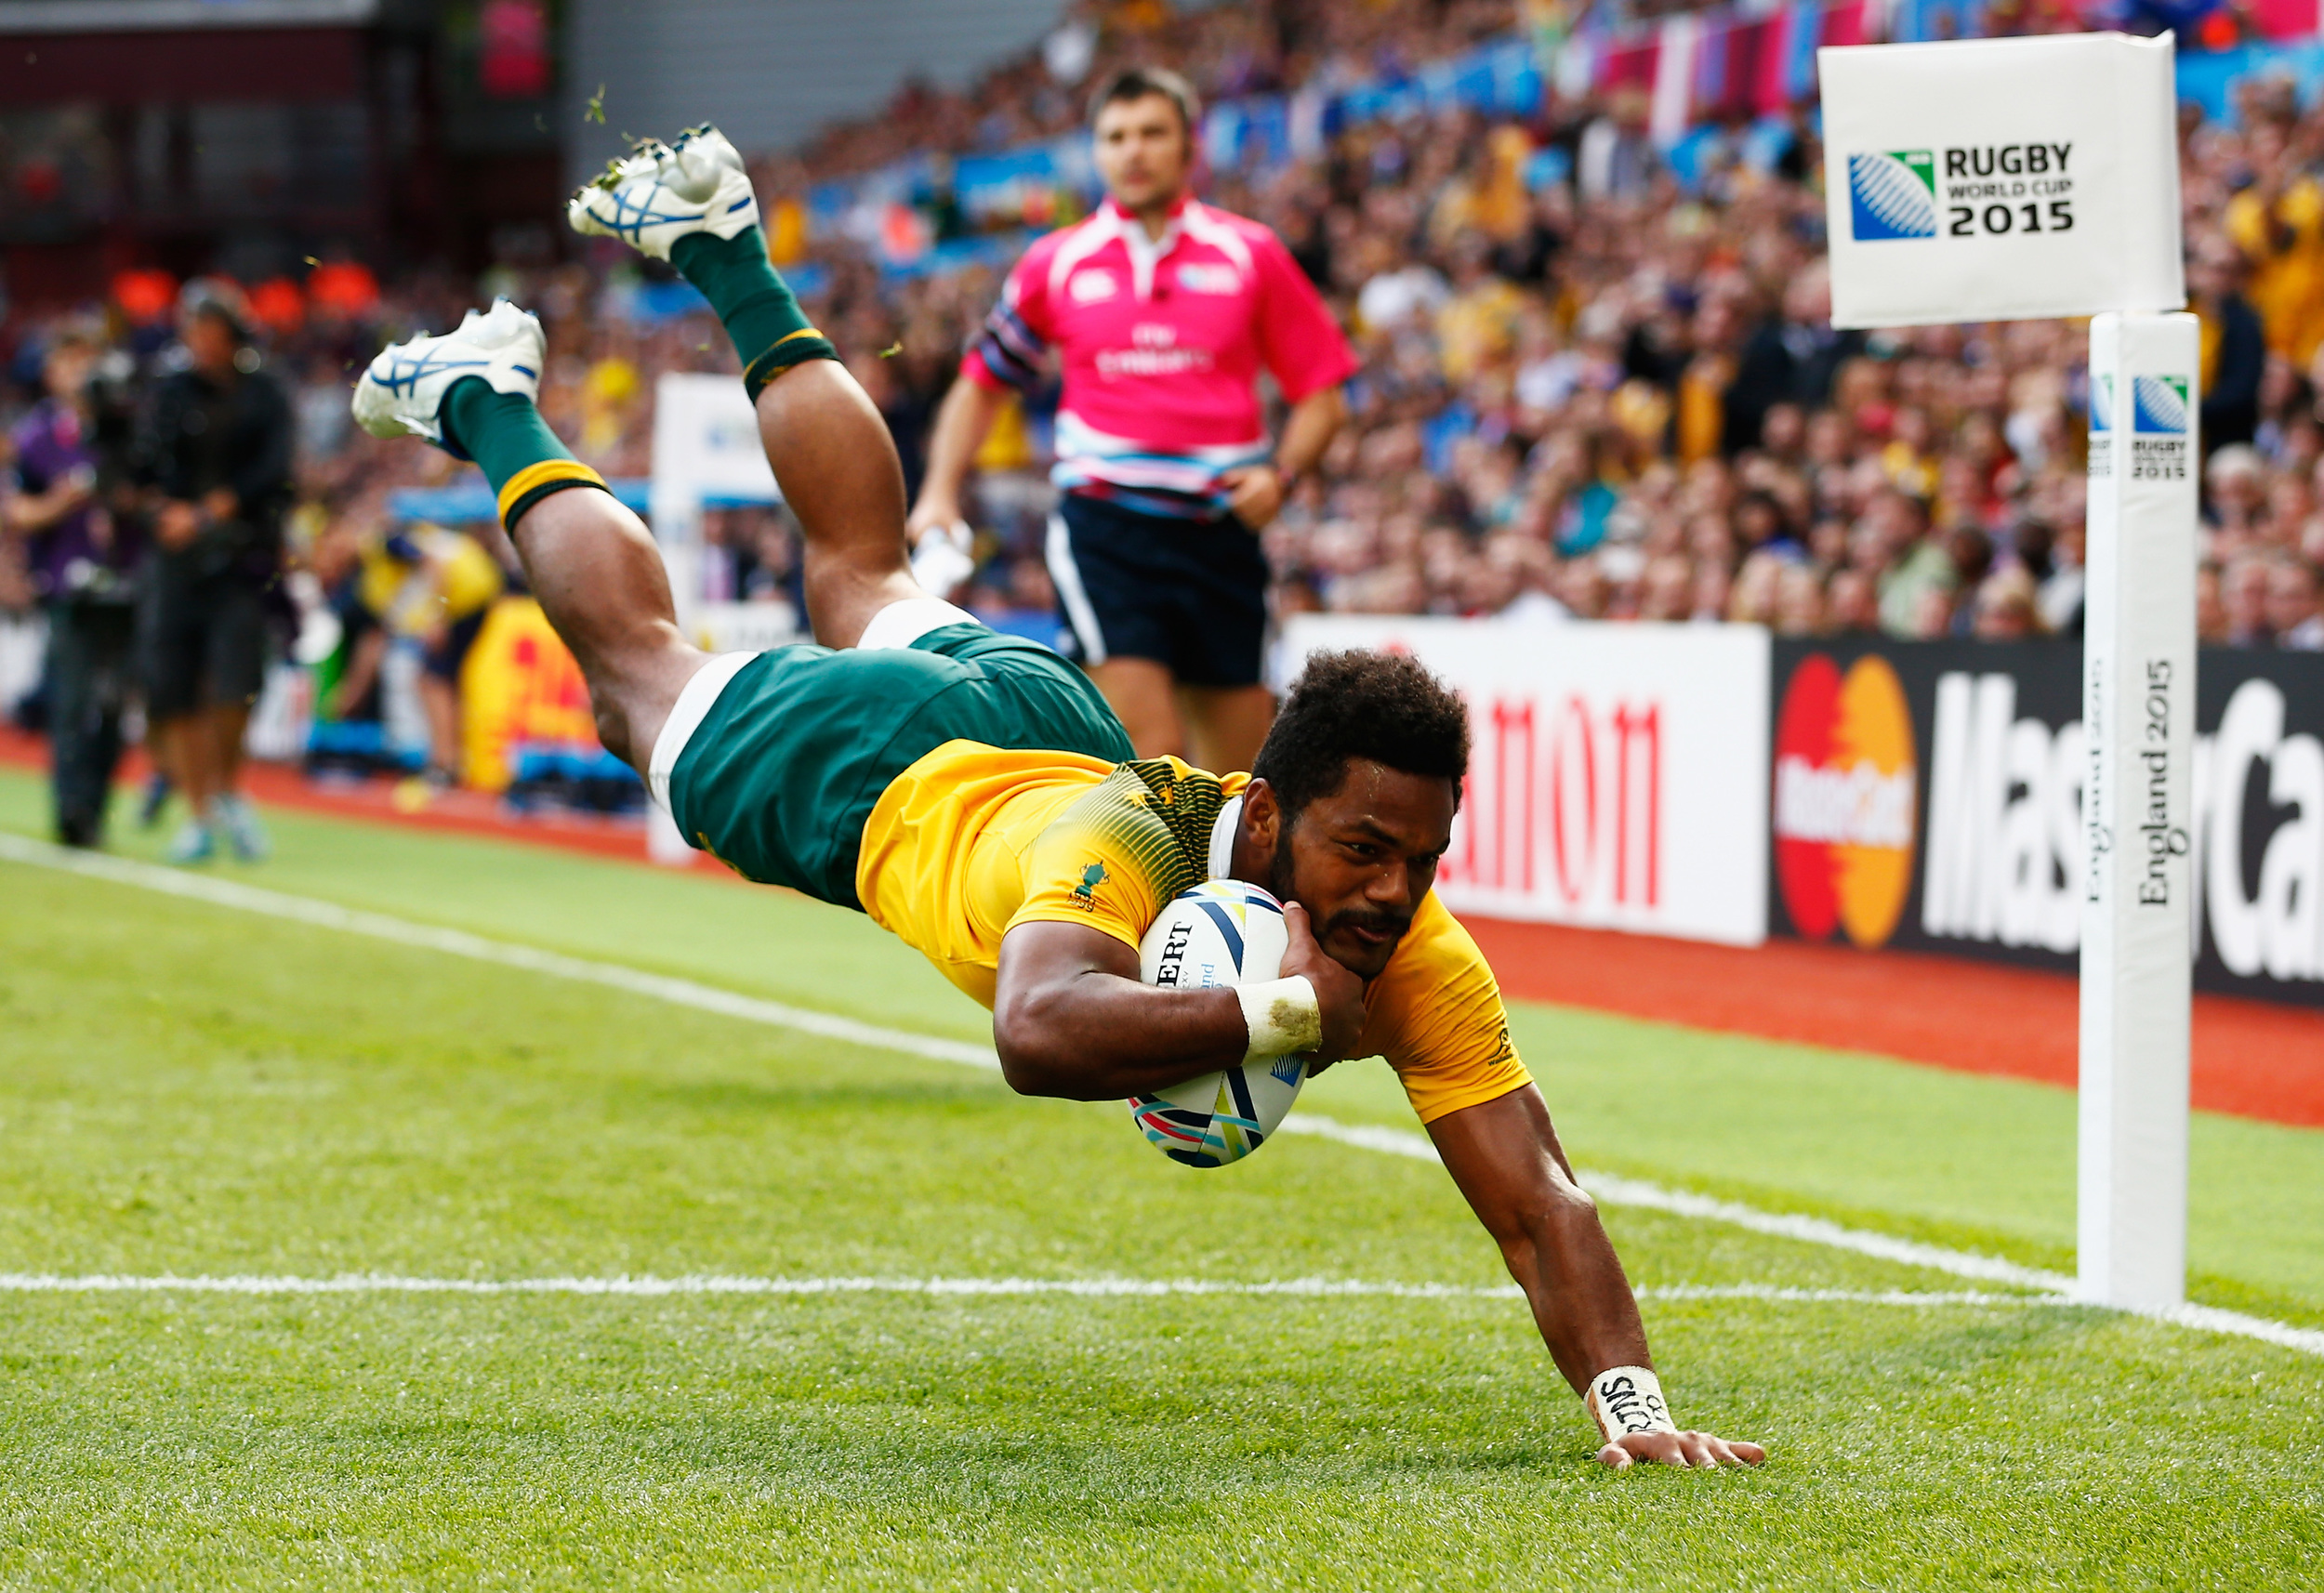  Henry Speight diving in 